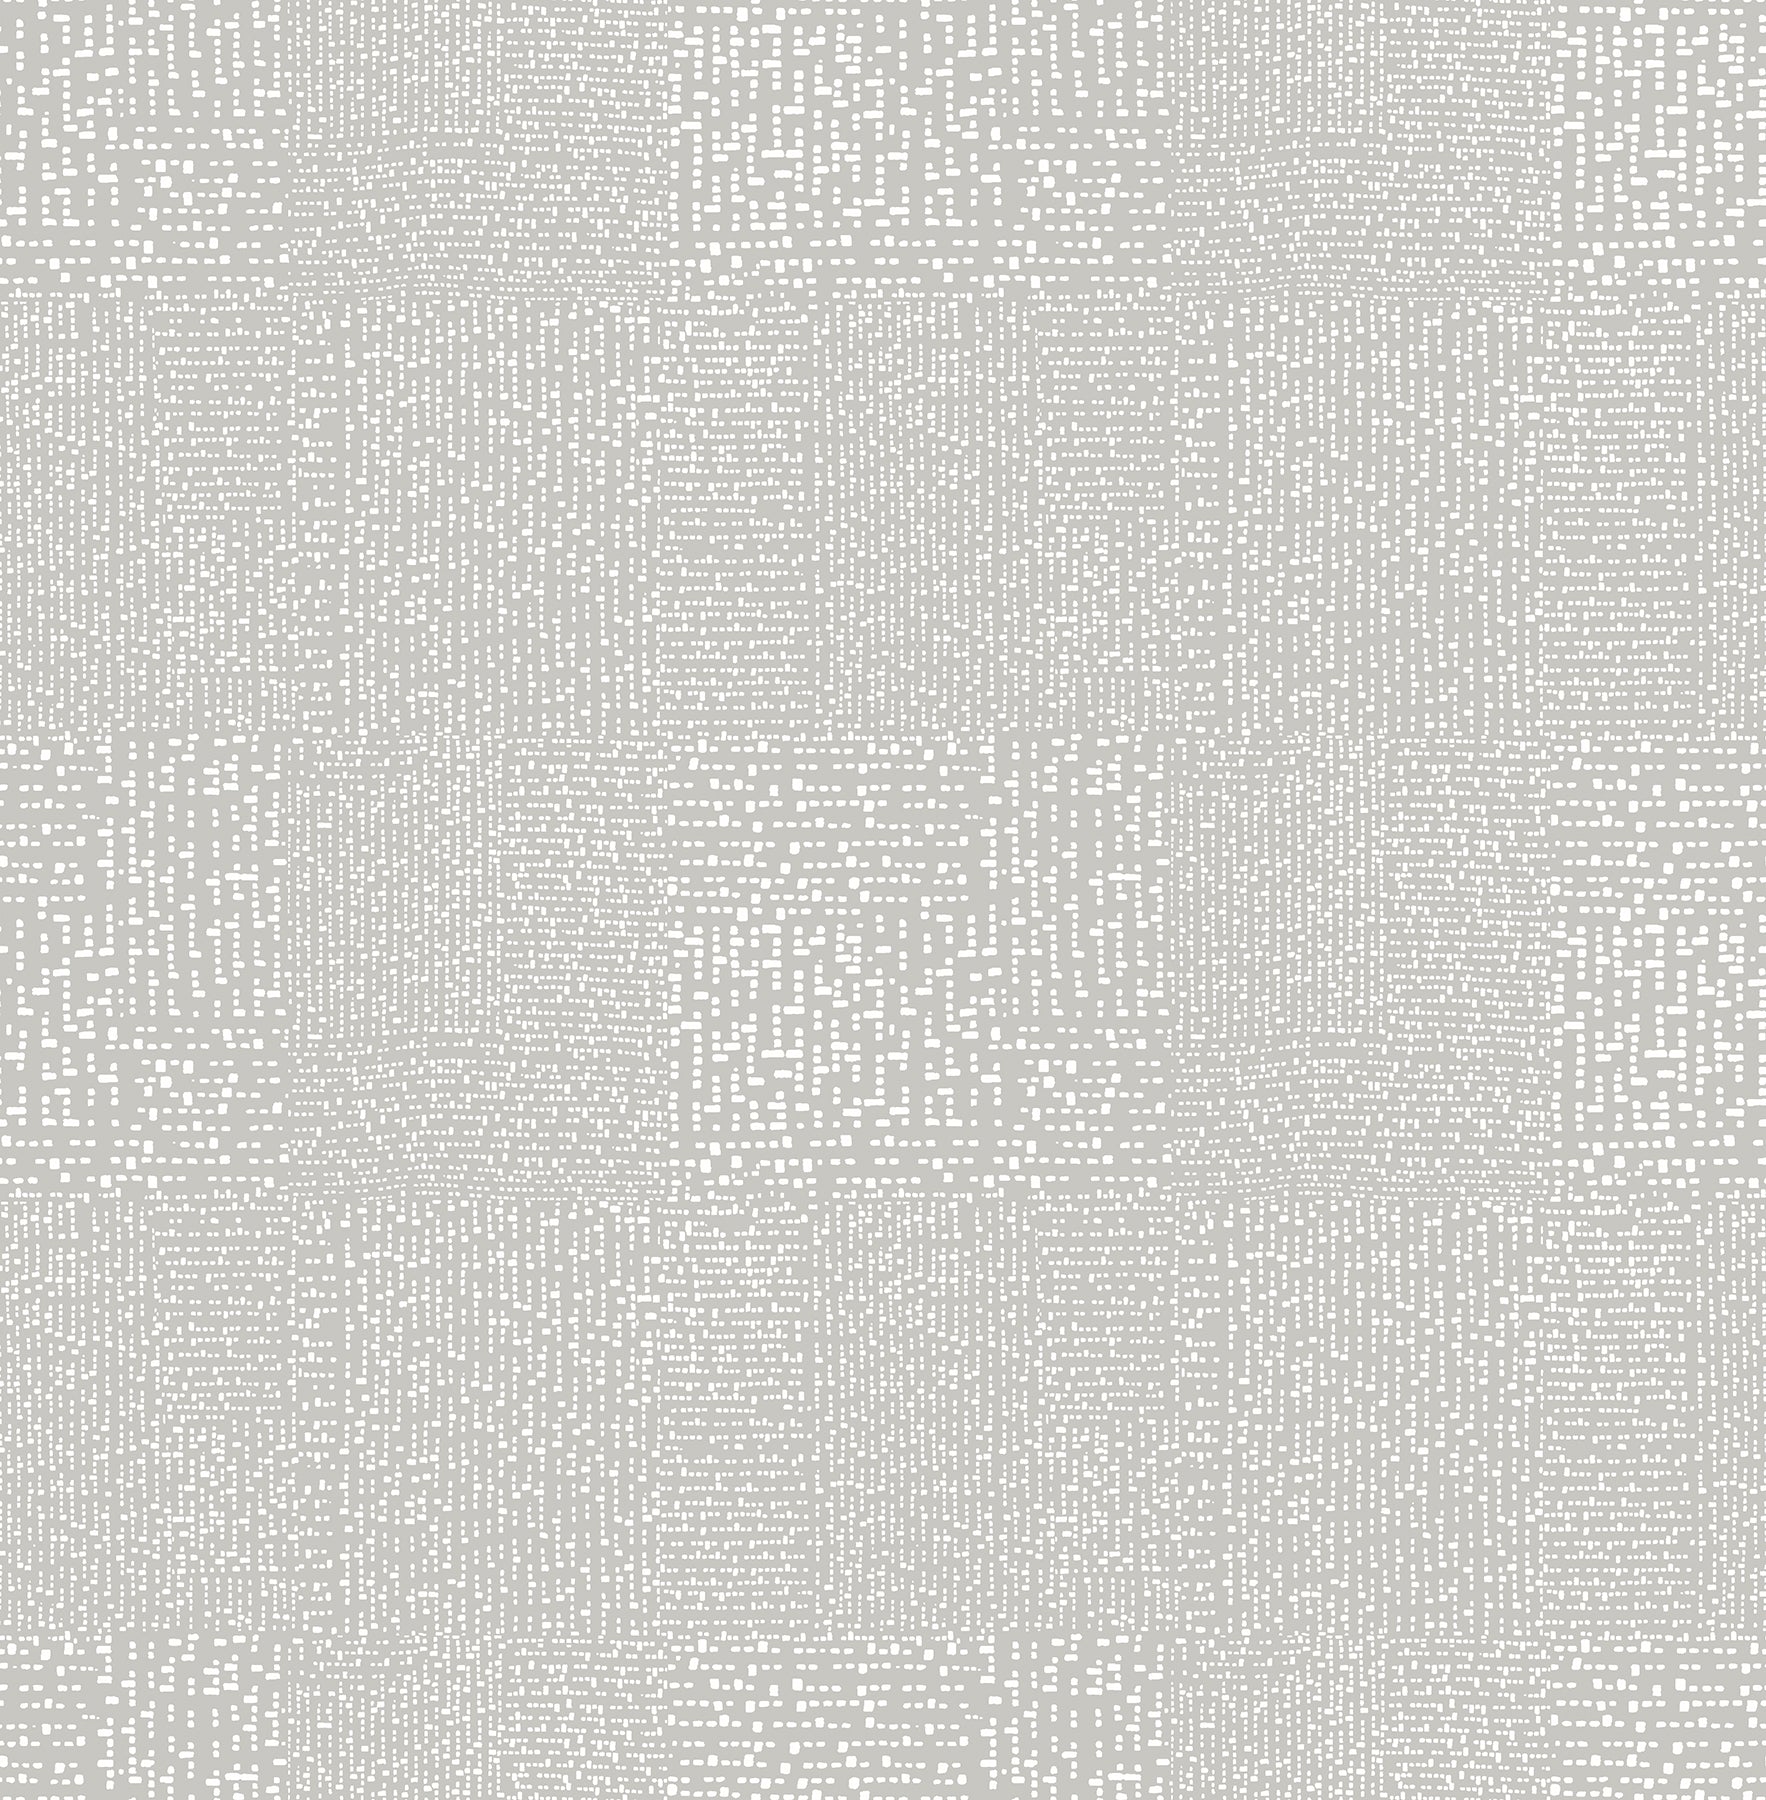 Looking for 2861-25738 Equinox Zenith Grey Abstract Geometric Grey A-Street Prints Wallpaper